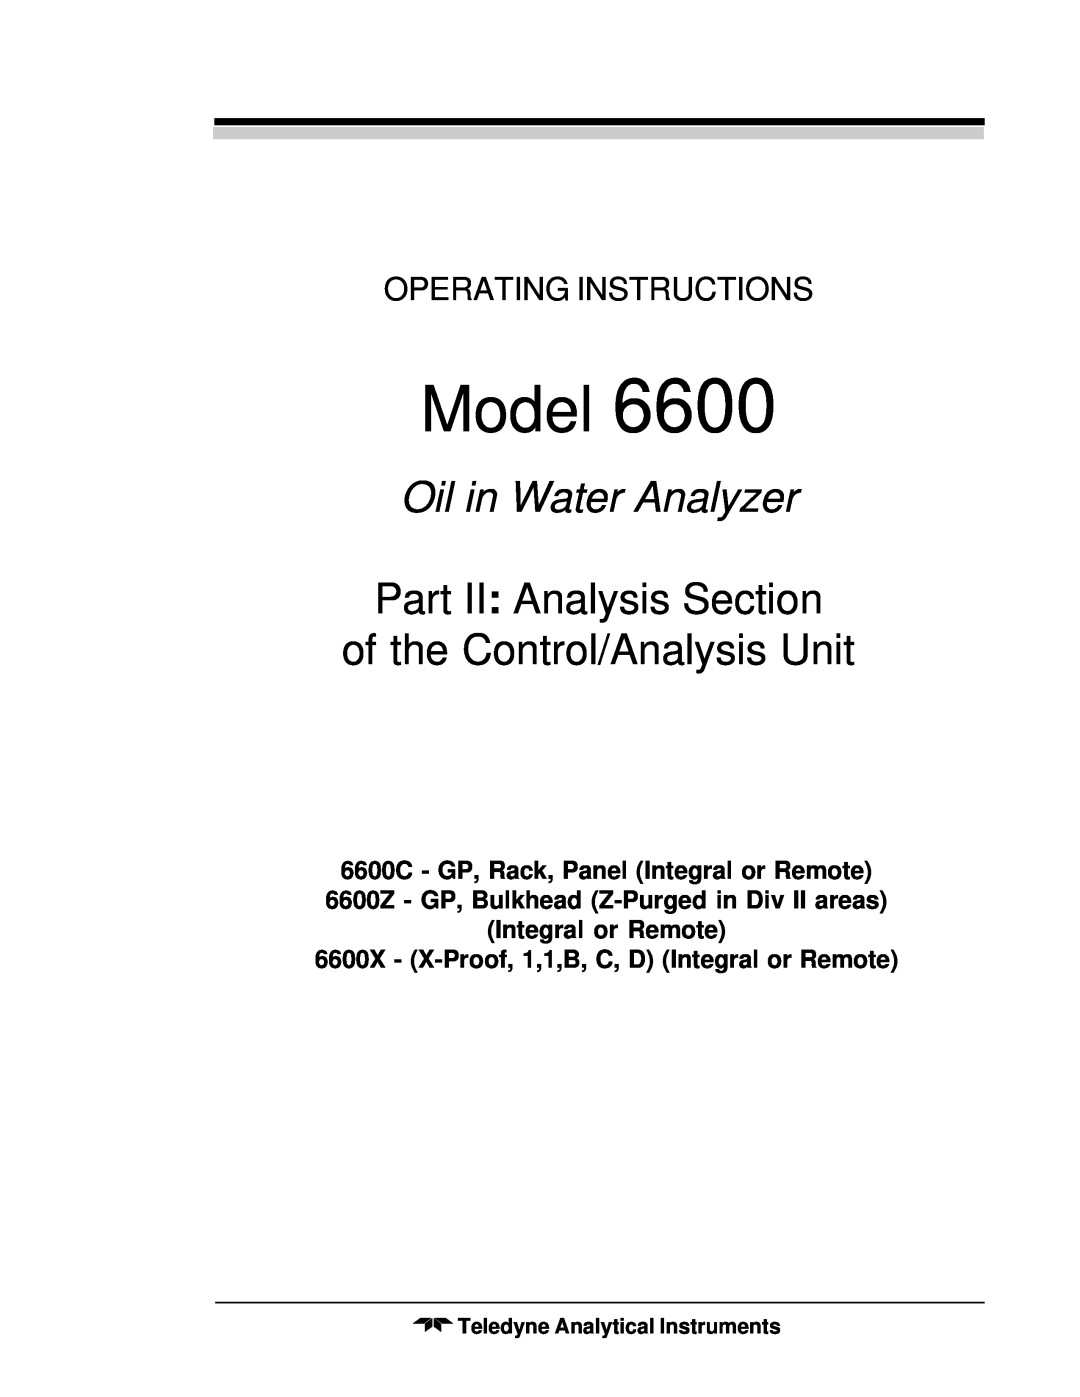 Teledyne 6600 manual Part II: Analysis Section, Model, Oil in Water Analyzer, of the Control/Analysis Unit 